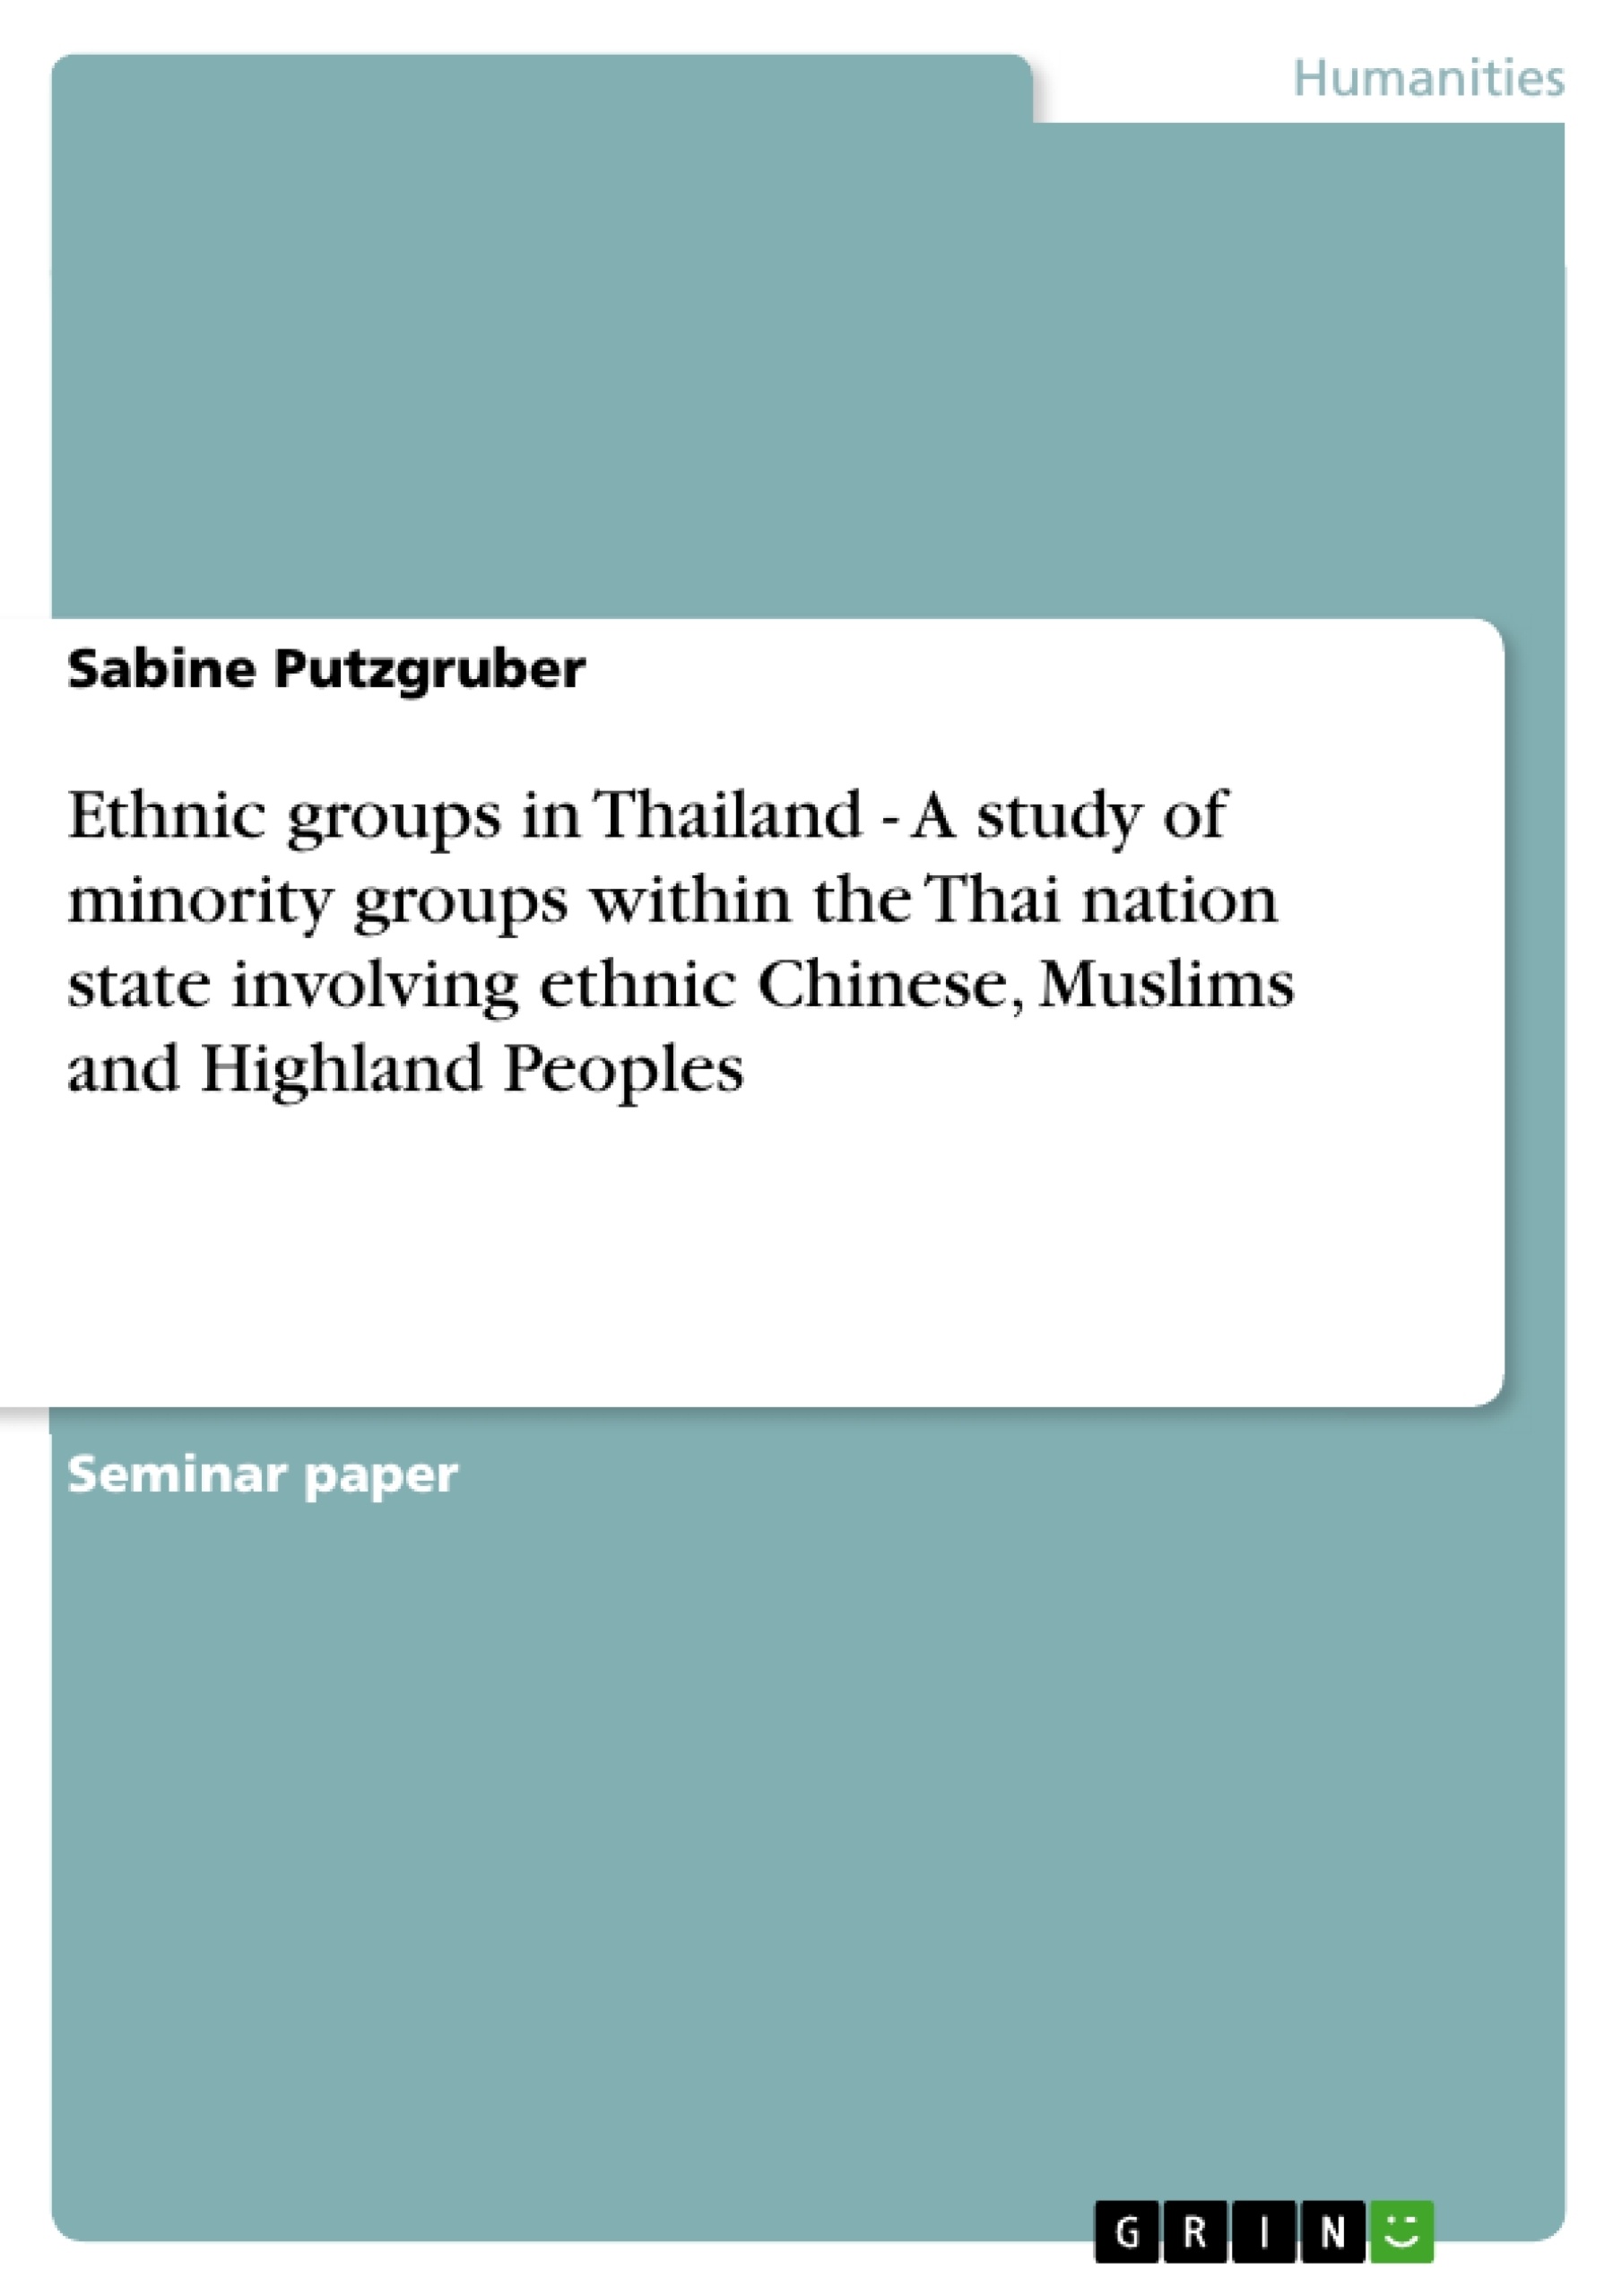 Title: Ethnic groups in Thailand - A study of minority groups within the Thai nation state involving ethnic Chinese, Muslims and Highland Peoples